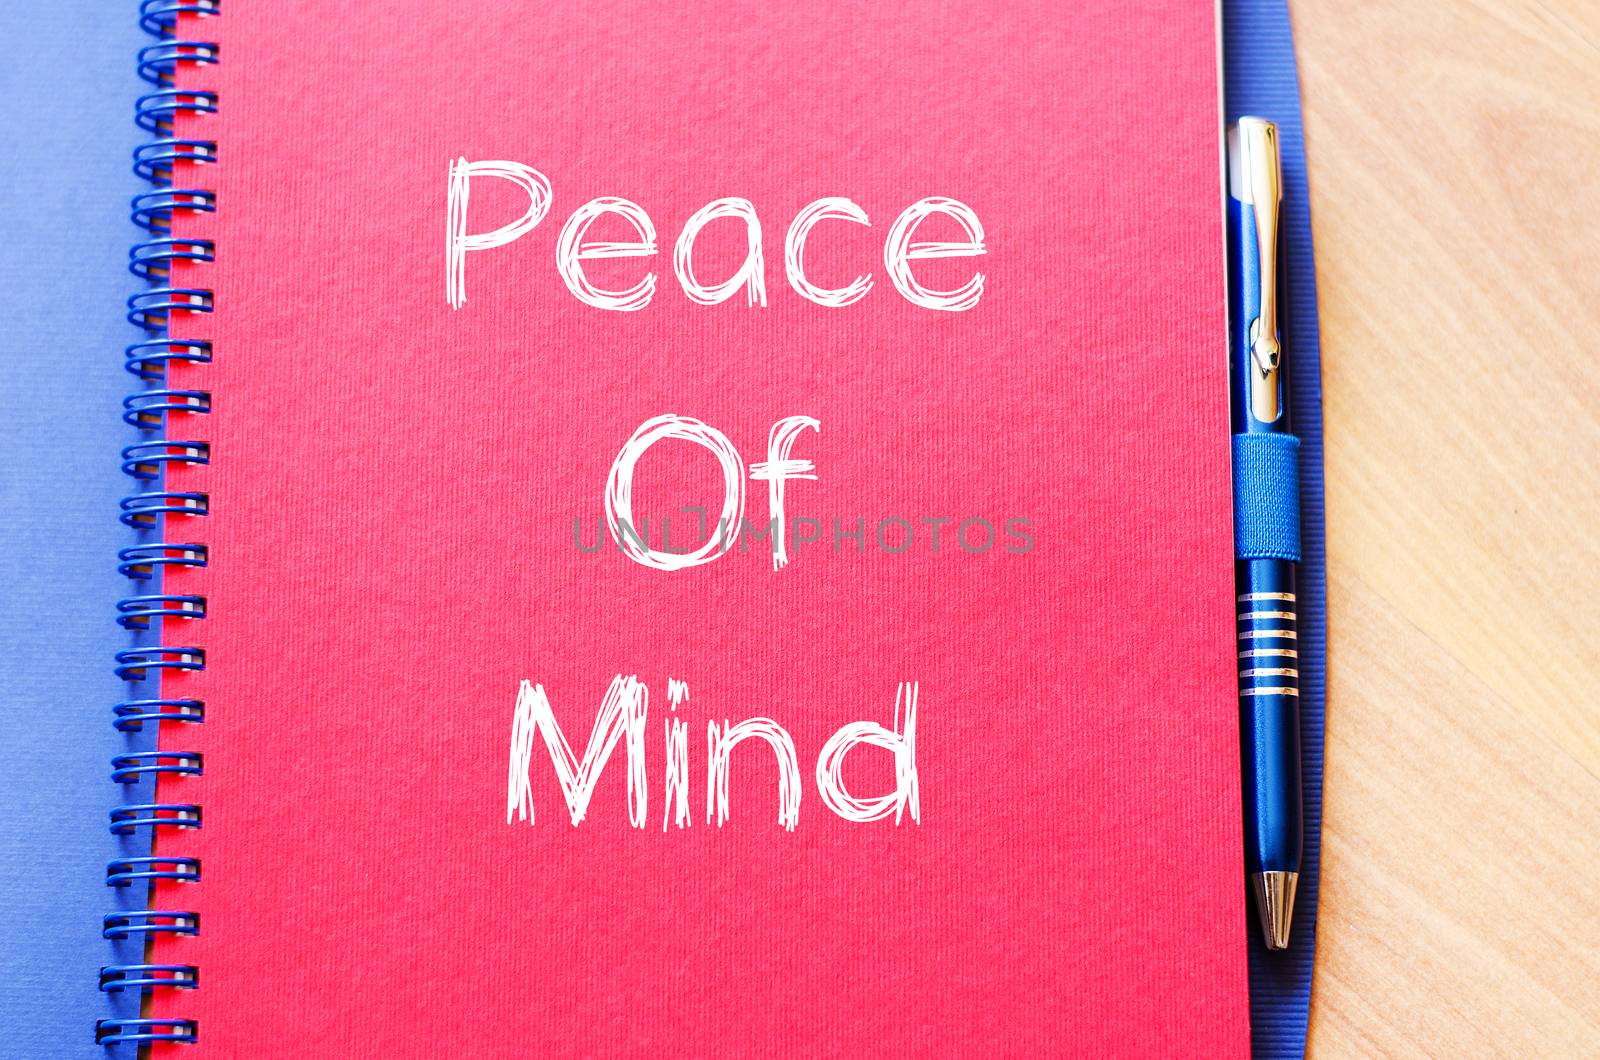 Peace of mind text concept write on notebook with pen